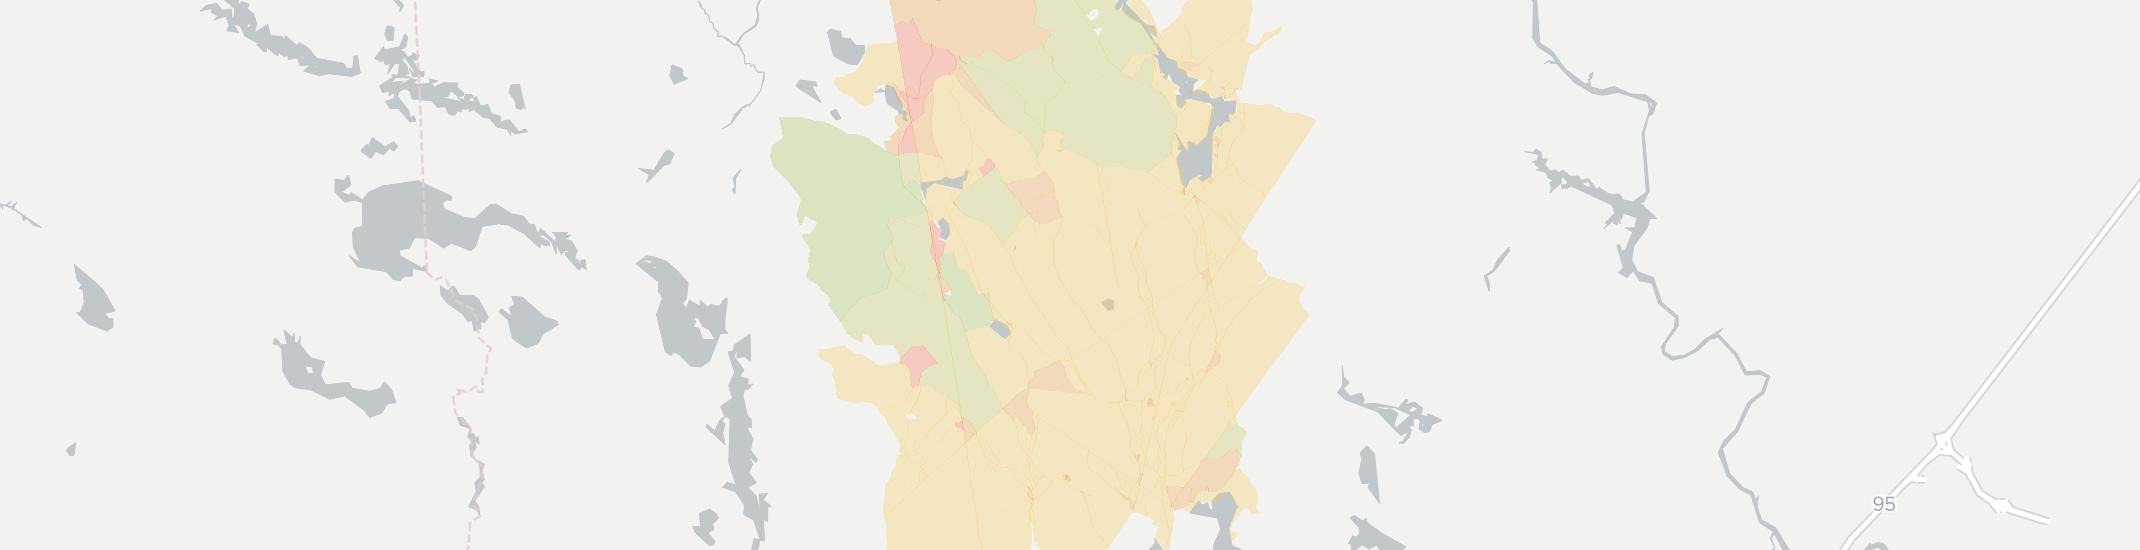 Waterboro Internet Competition Map. Click for interactive map.